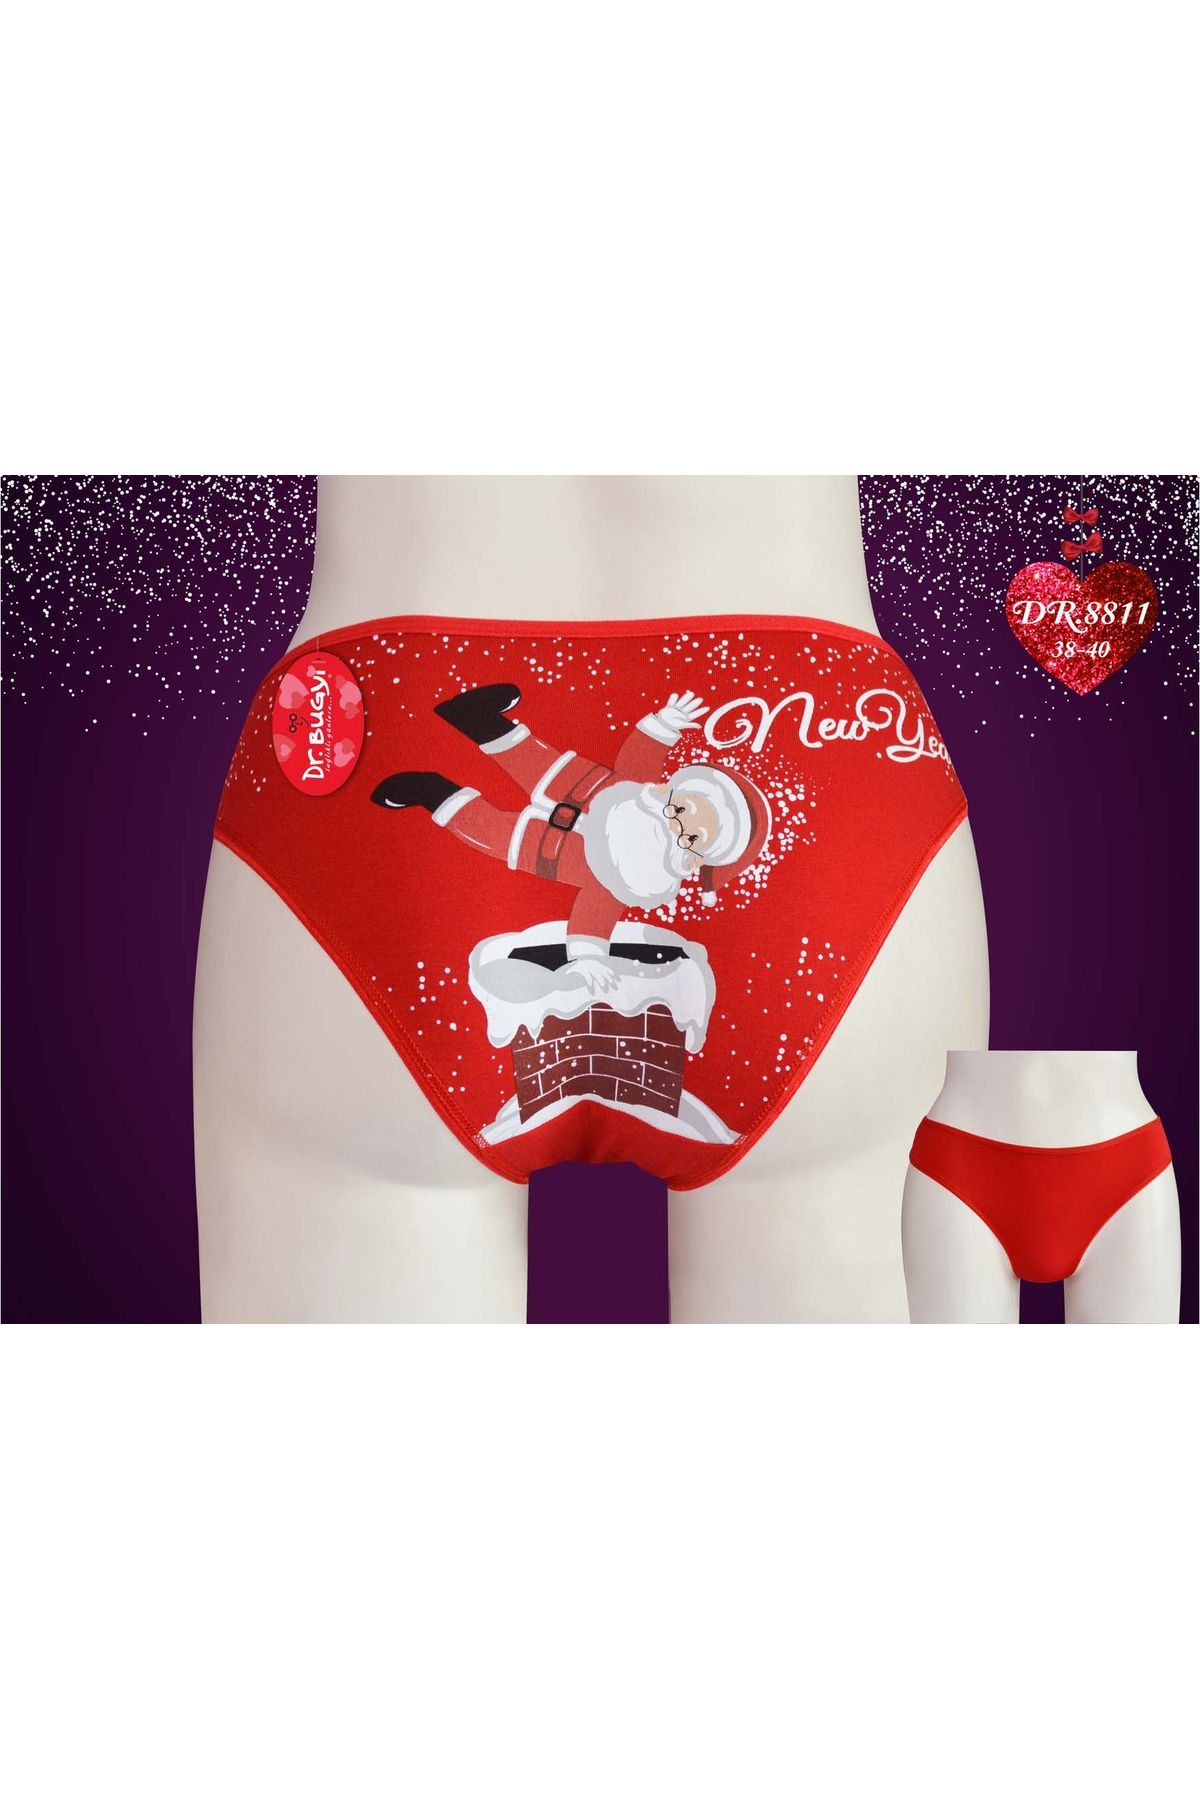 Papatya DR.BUGGY 8811 WOMEN'S CHRISTMAS NEW YEAR BACK PRINTED RED PANTIES  (38-40) STANDARD SIZE - Trendyol